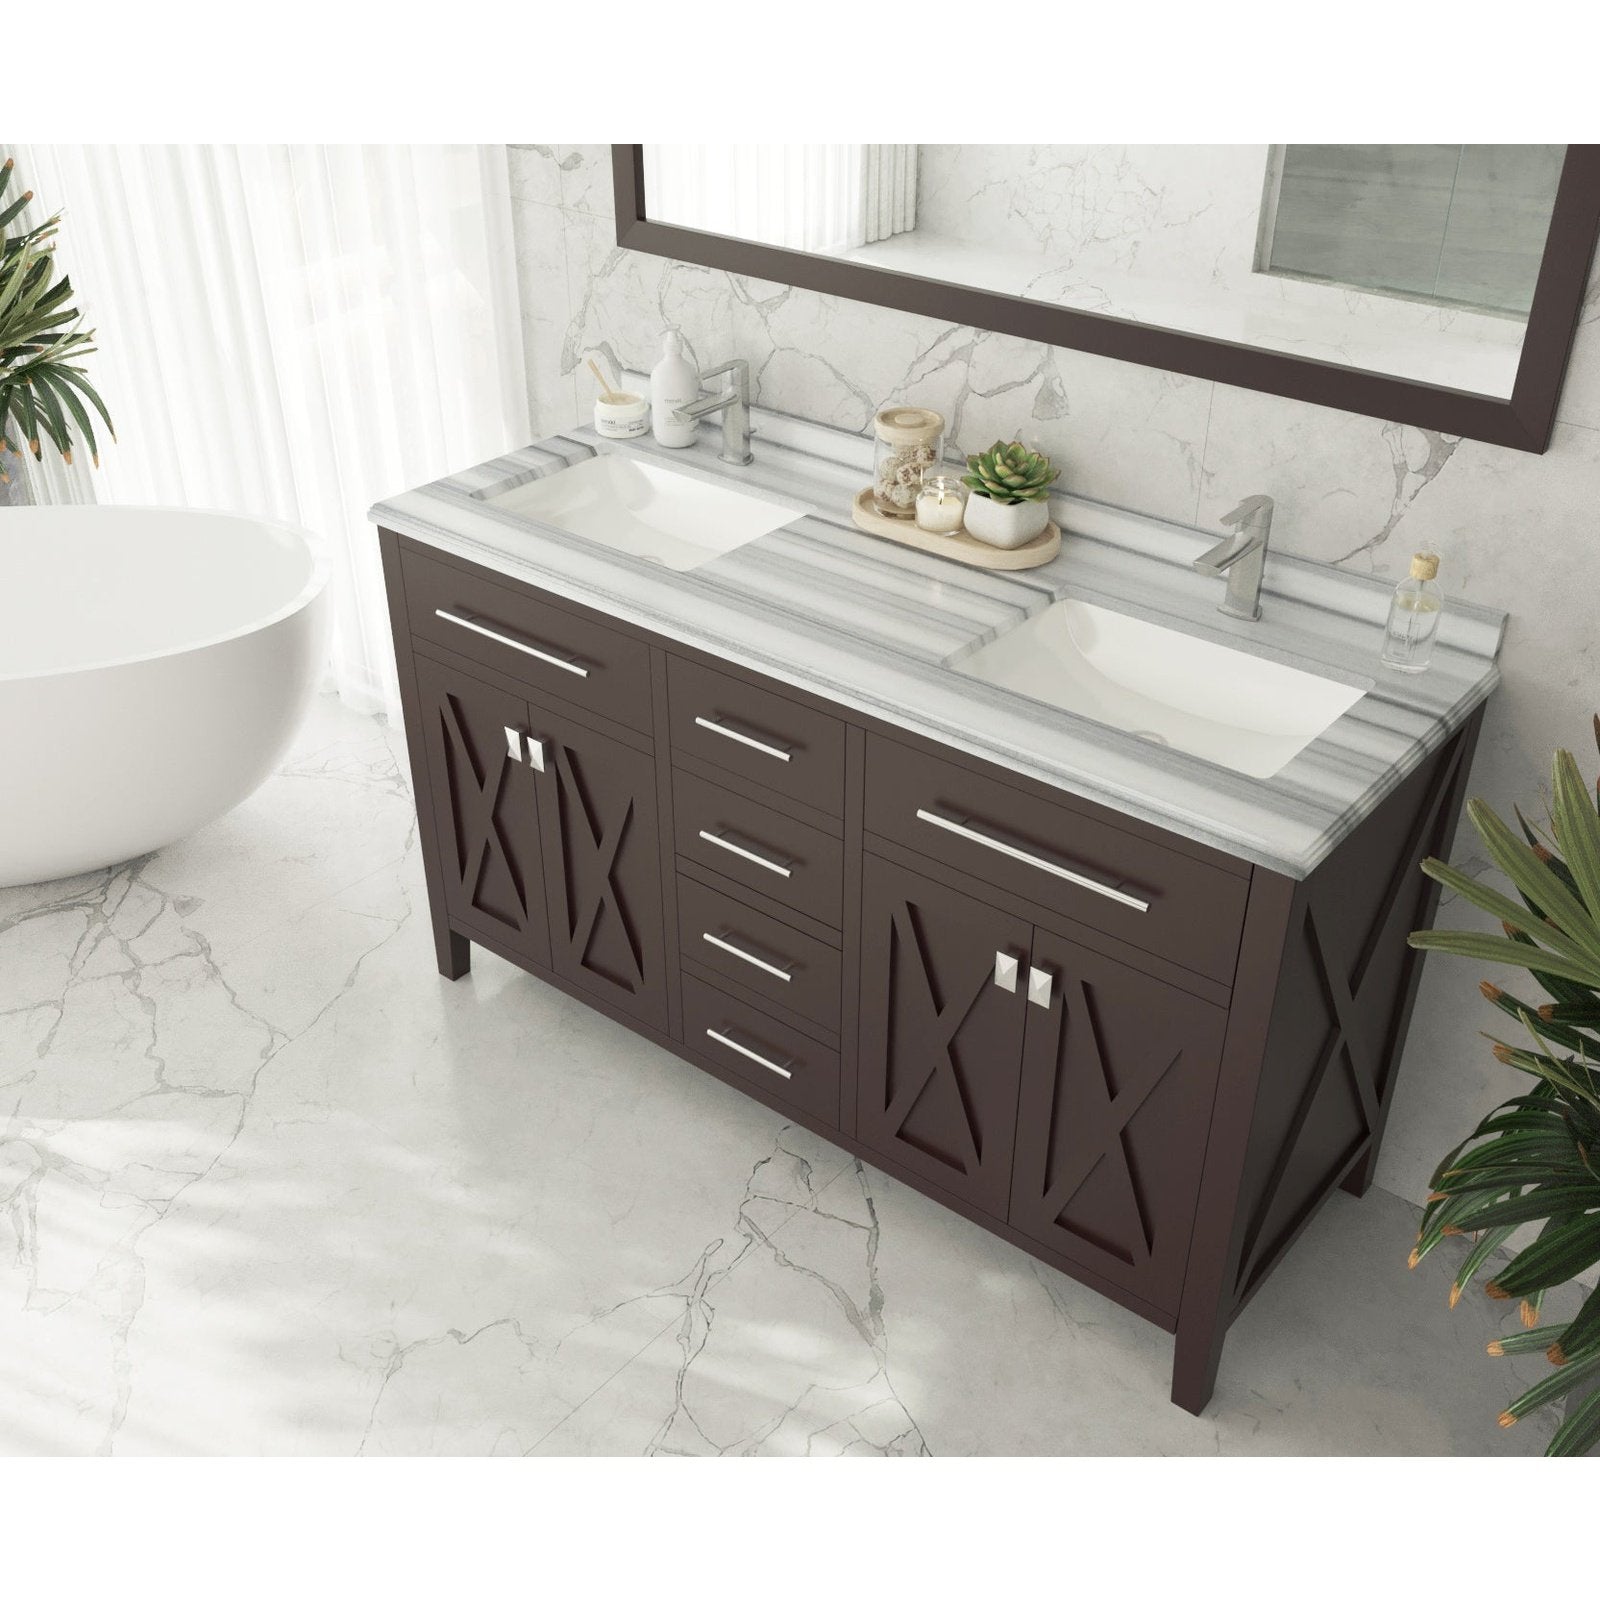 Laviva Wimbledon 60" Brown Double Sink Bathroom Vanity with White Stripes Marble Countertop 313YG319-60B-WS